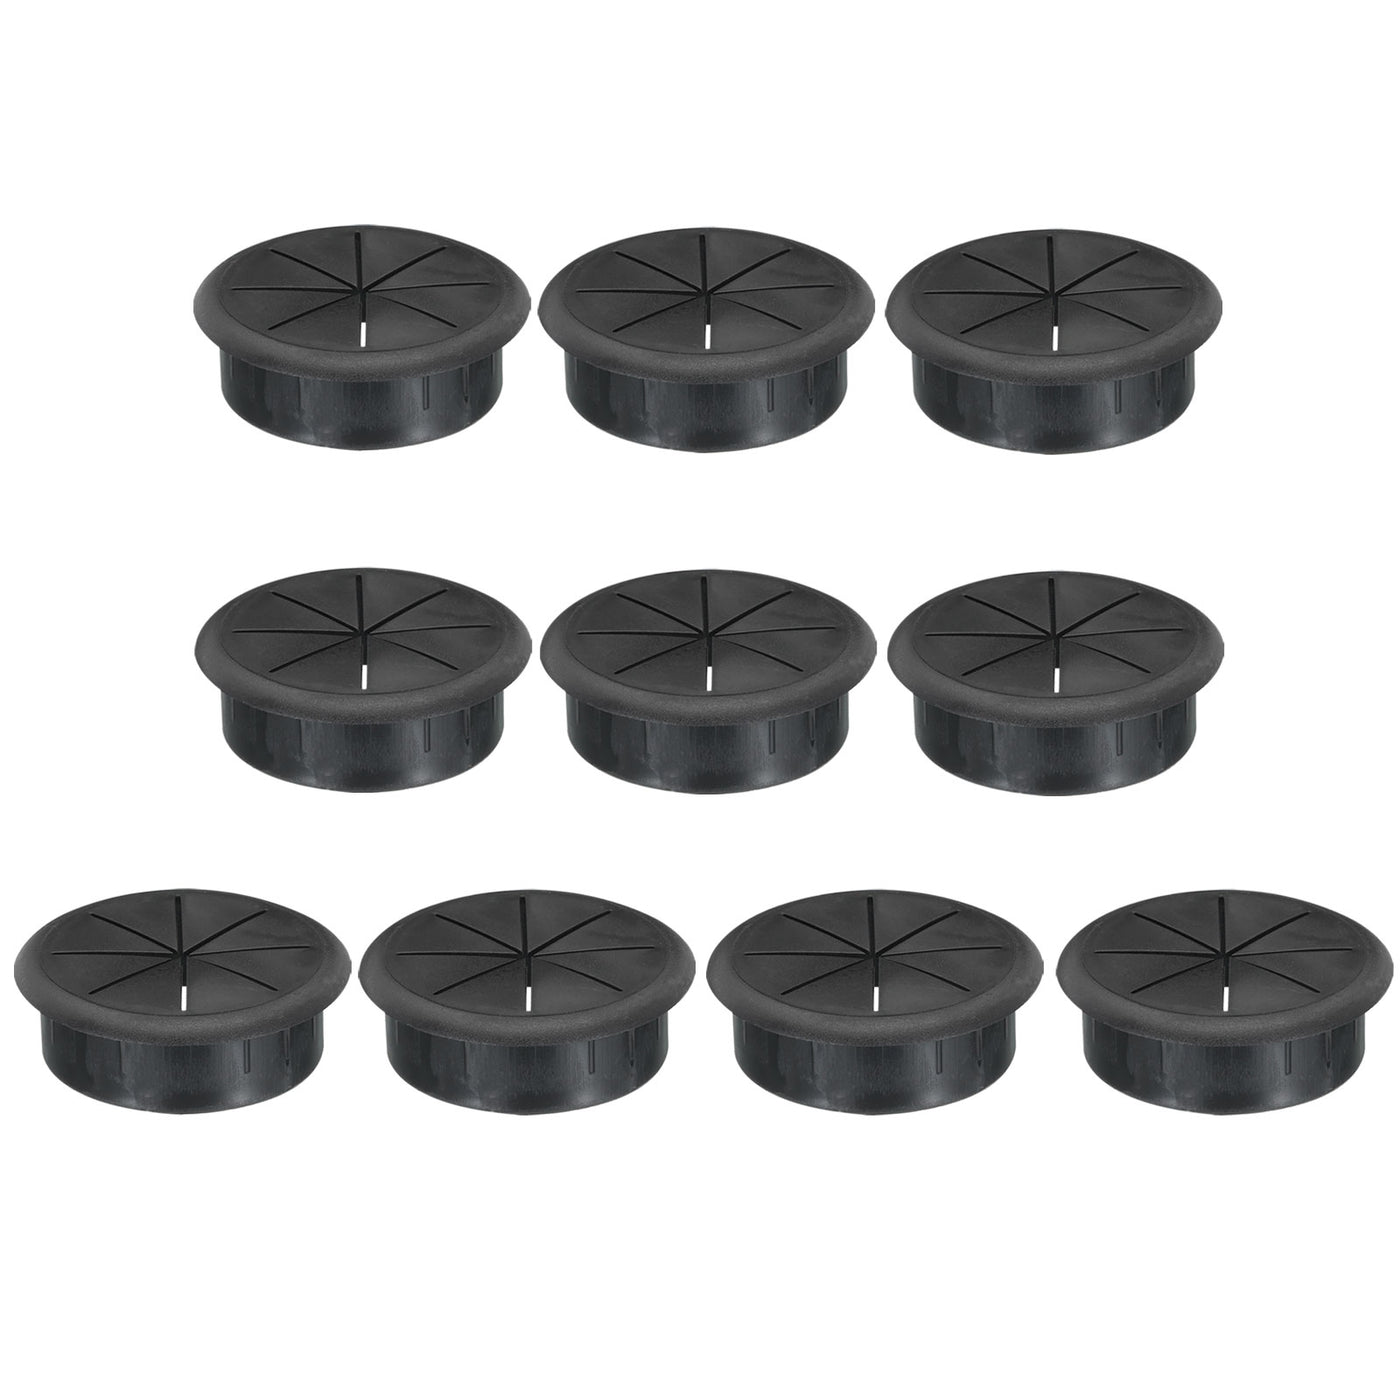 uxcell Uxcell 10pcs 60mm Mounting Dia Black Plastic Cable Snap Locking Bushing Grommet